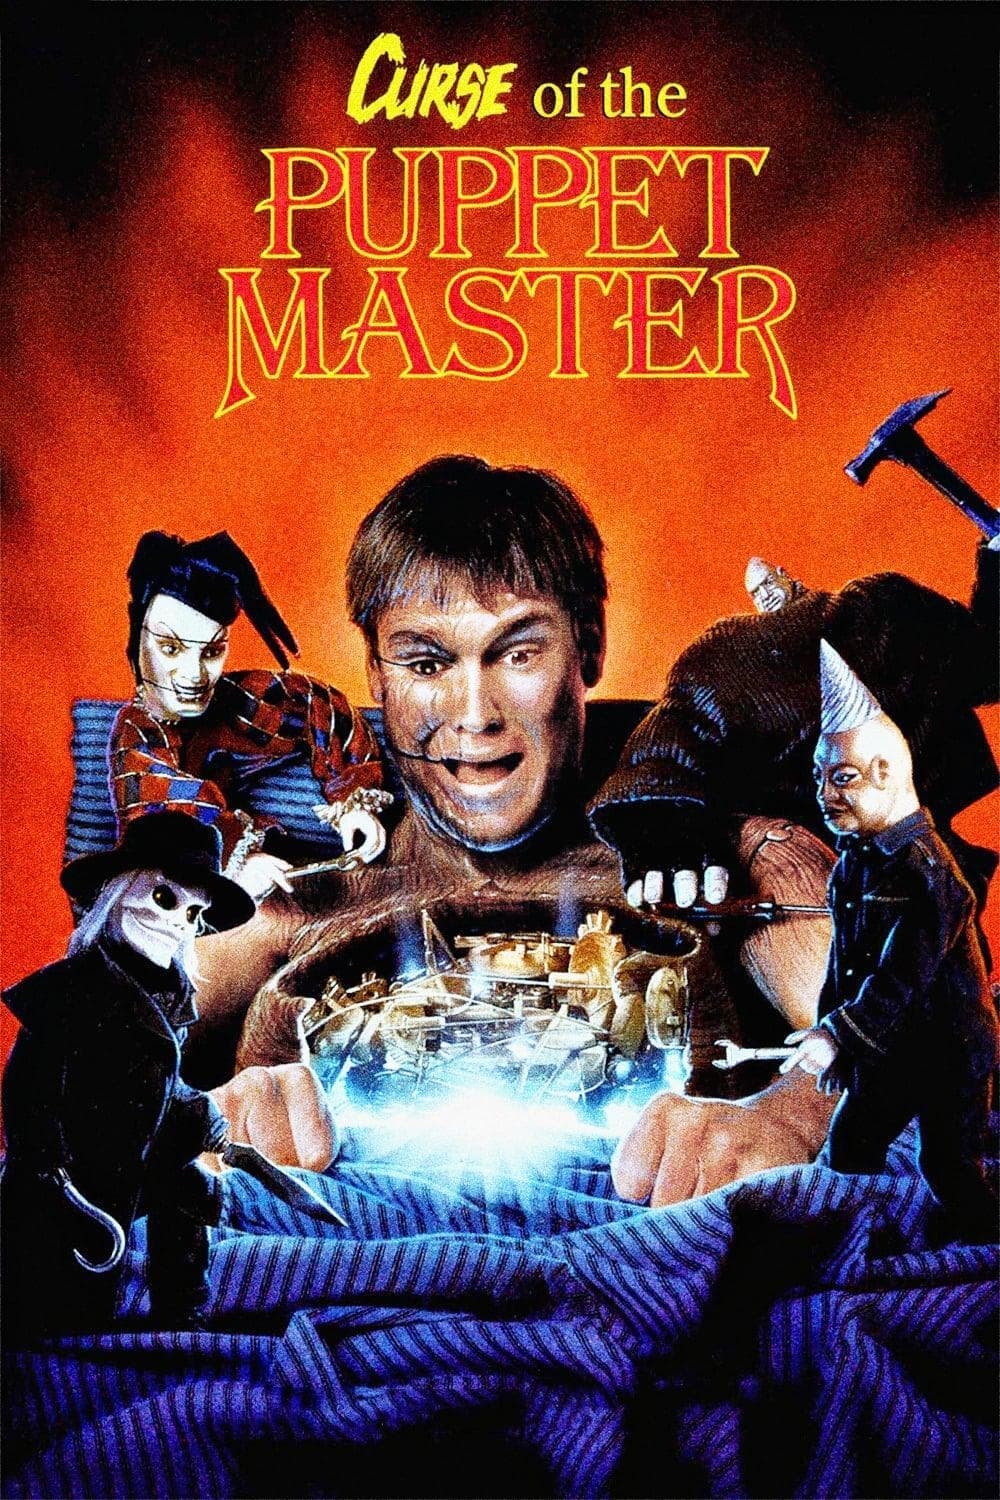 Puppet Master VI - Curse of the Puppetmaster (1998)